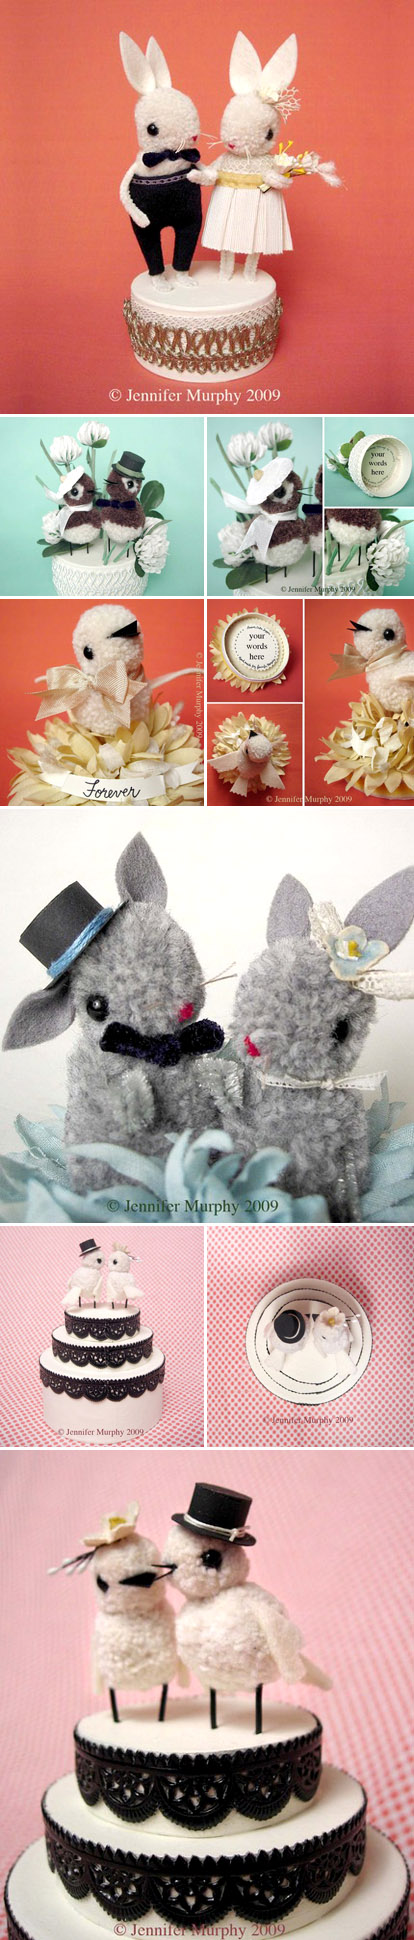 Vintage inspired hand made wedding cake toppers by Jennifer Murphy